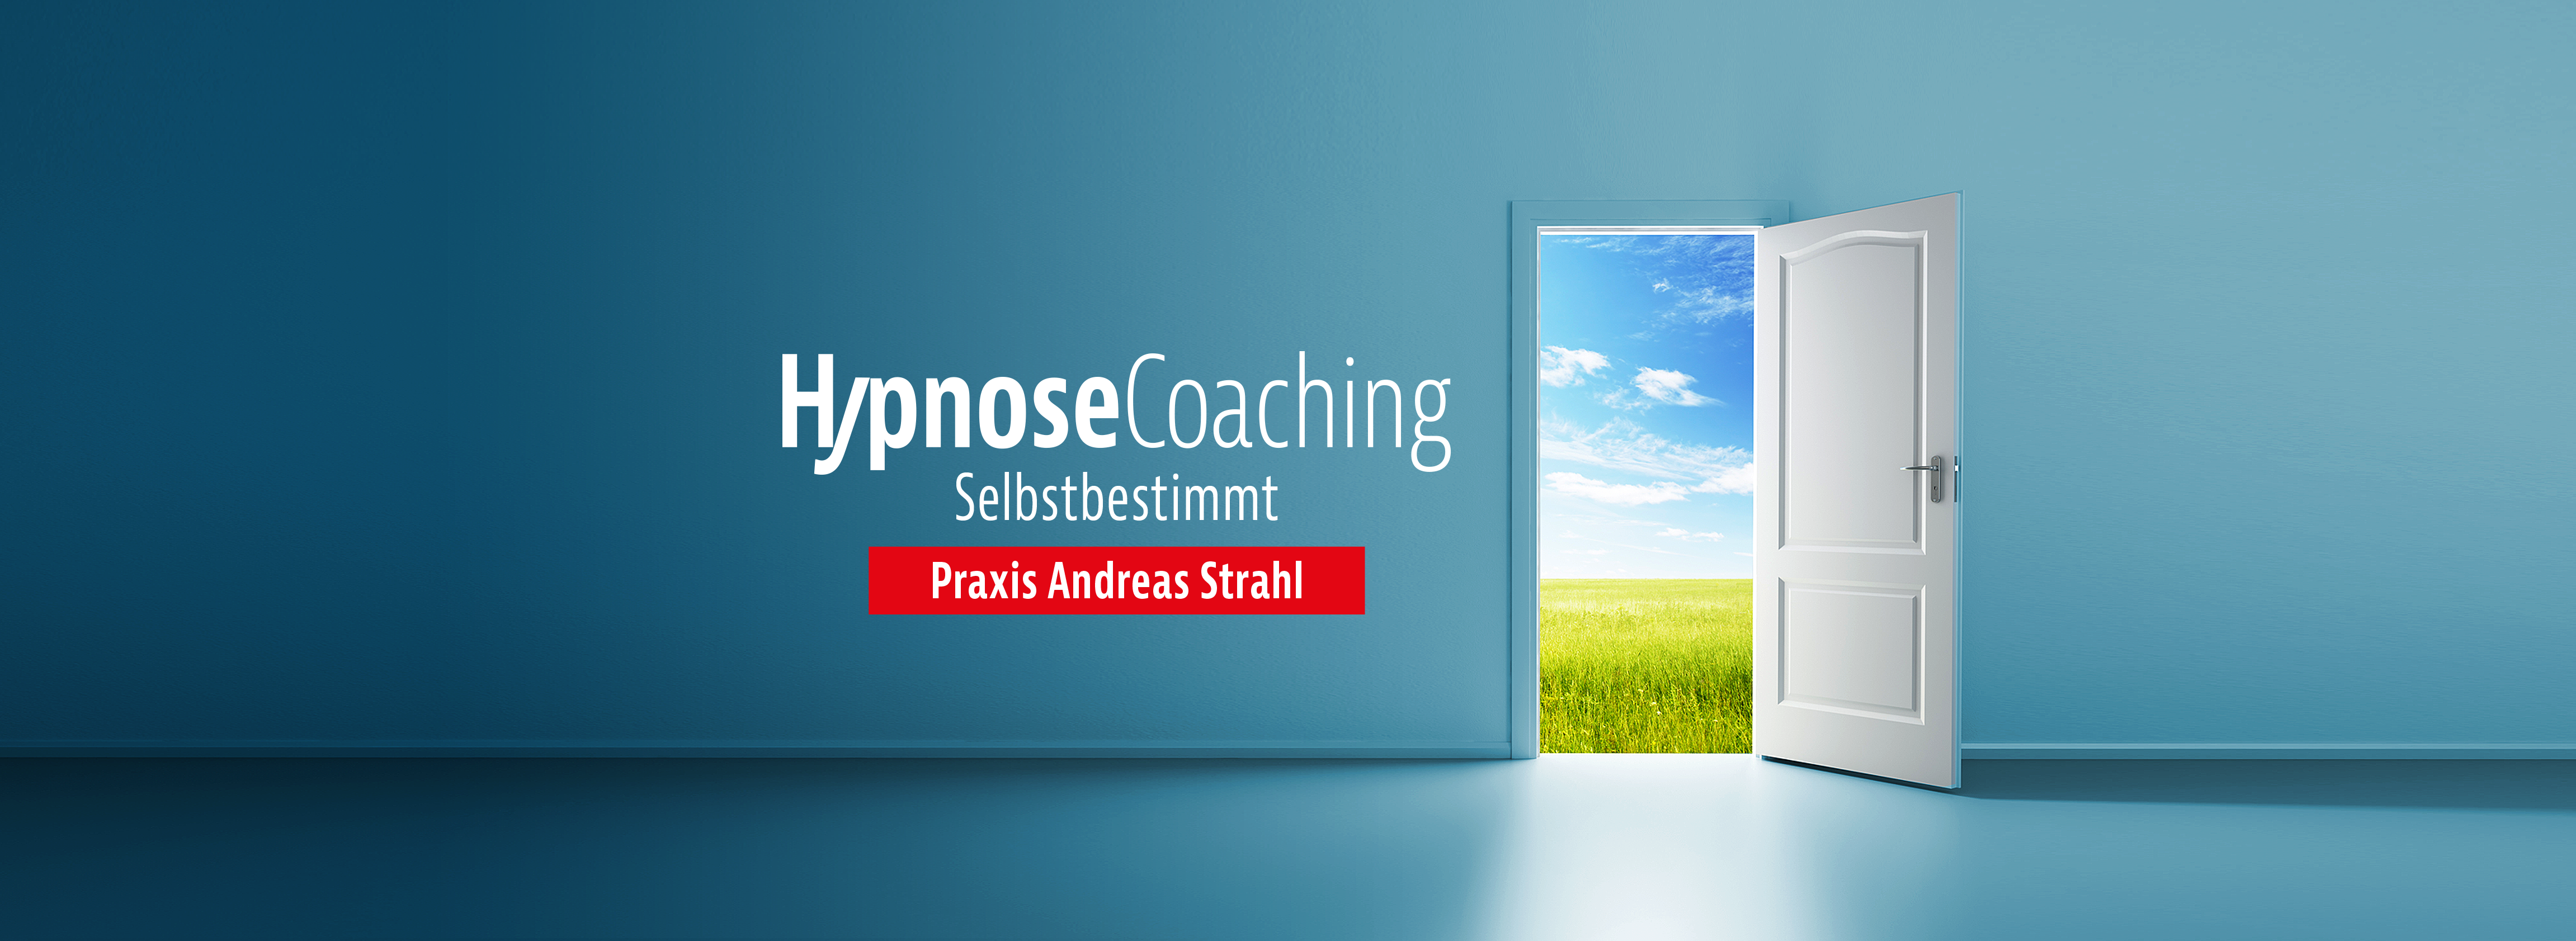 (c) Hypnosecoaching-selbstbestimmt.de